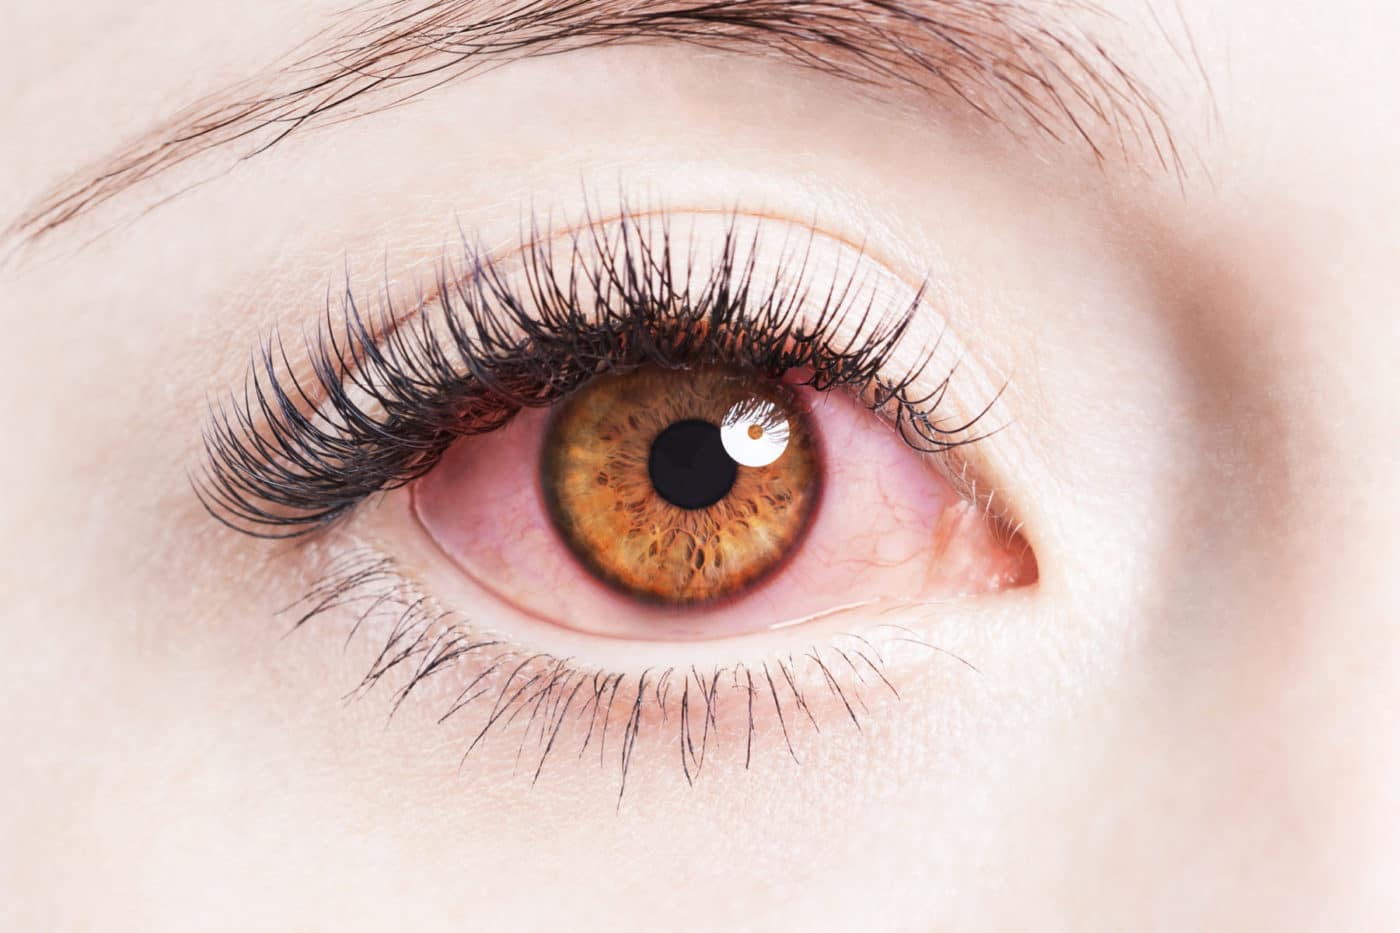 If your eyes are irritated due to fall eye allergies, contact us to learn more about treatment options.